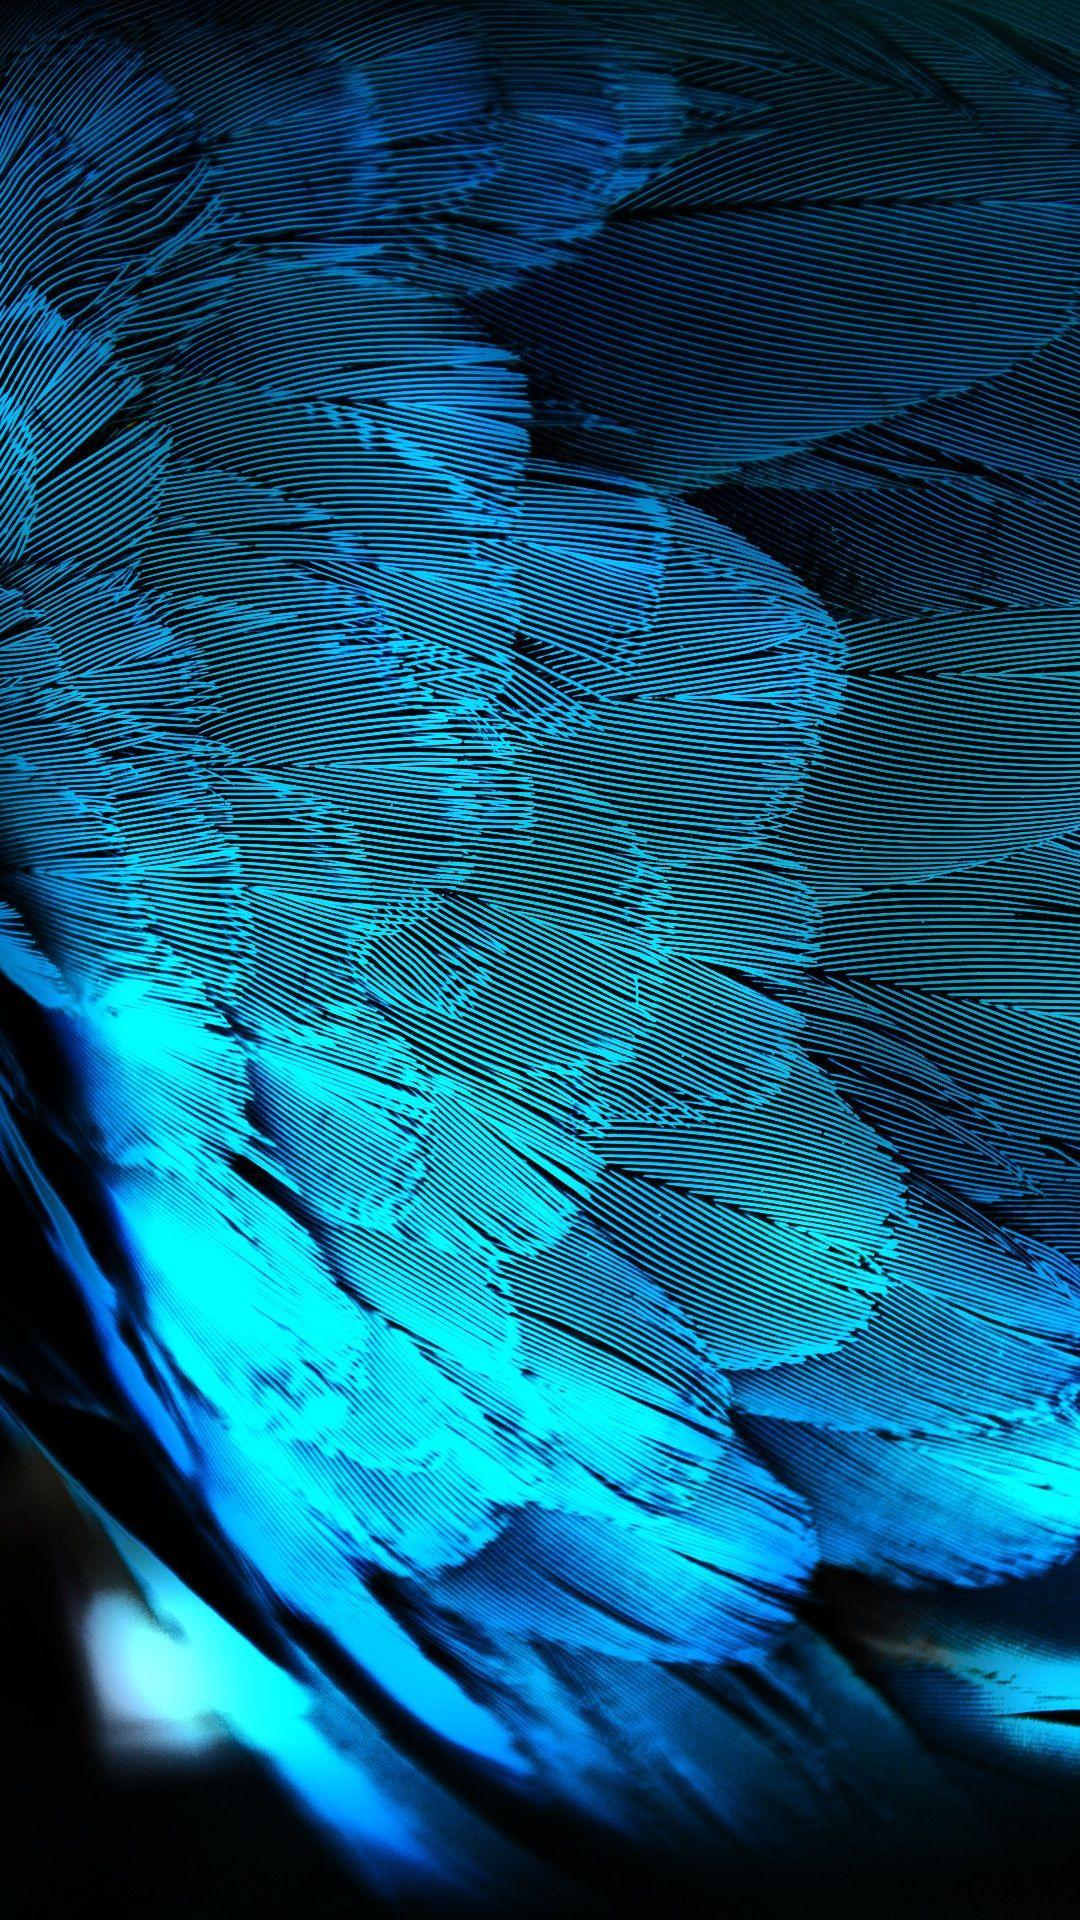 Peacock Feather HD Wallpapers - Wallpaper Cave